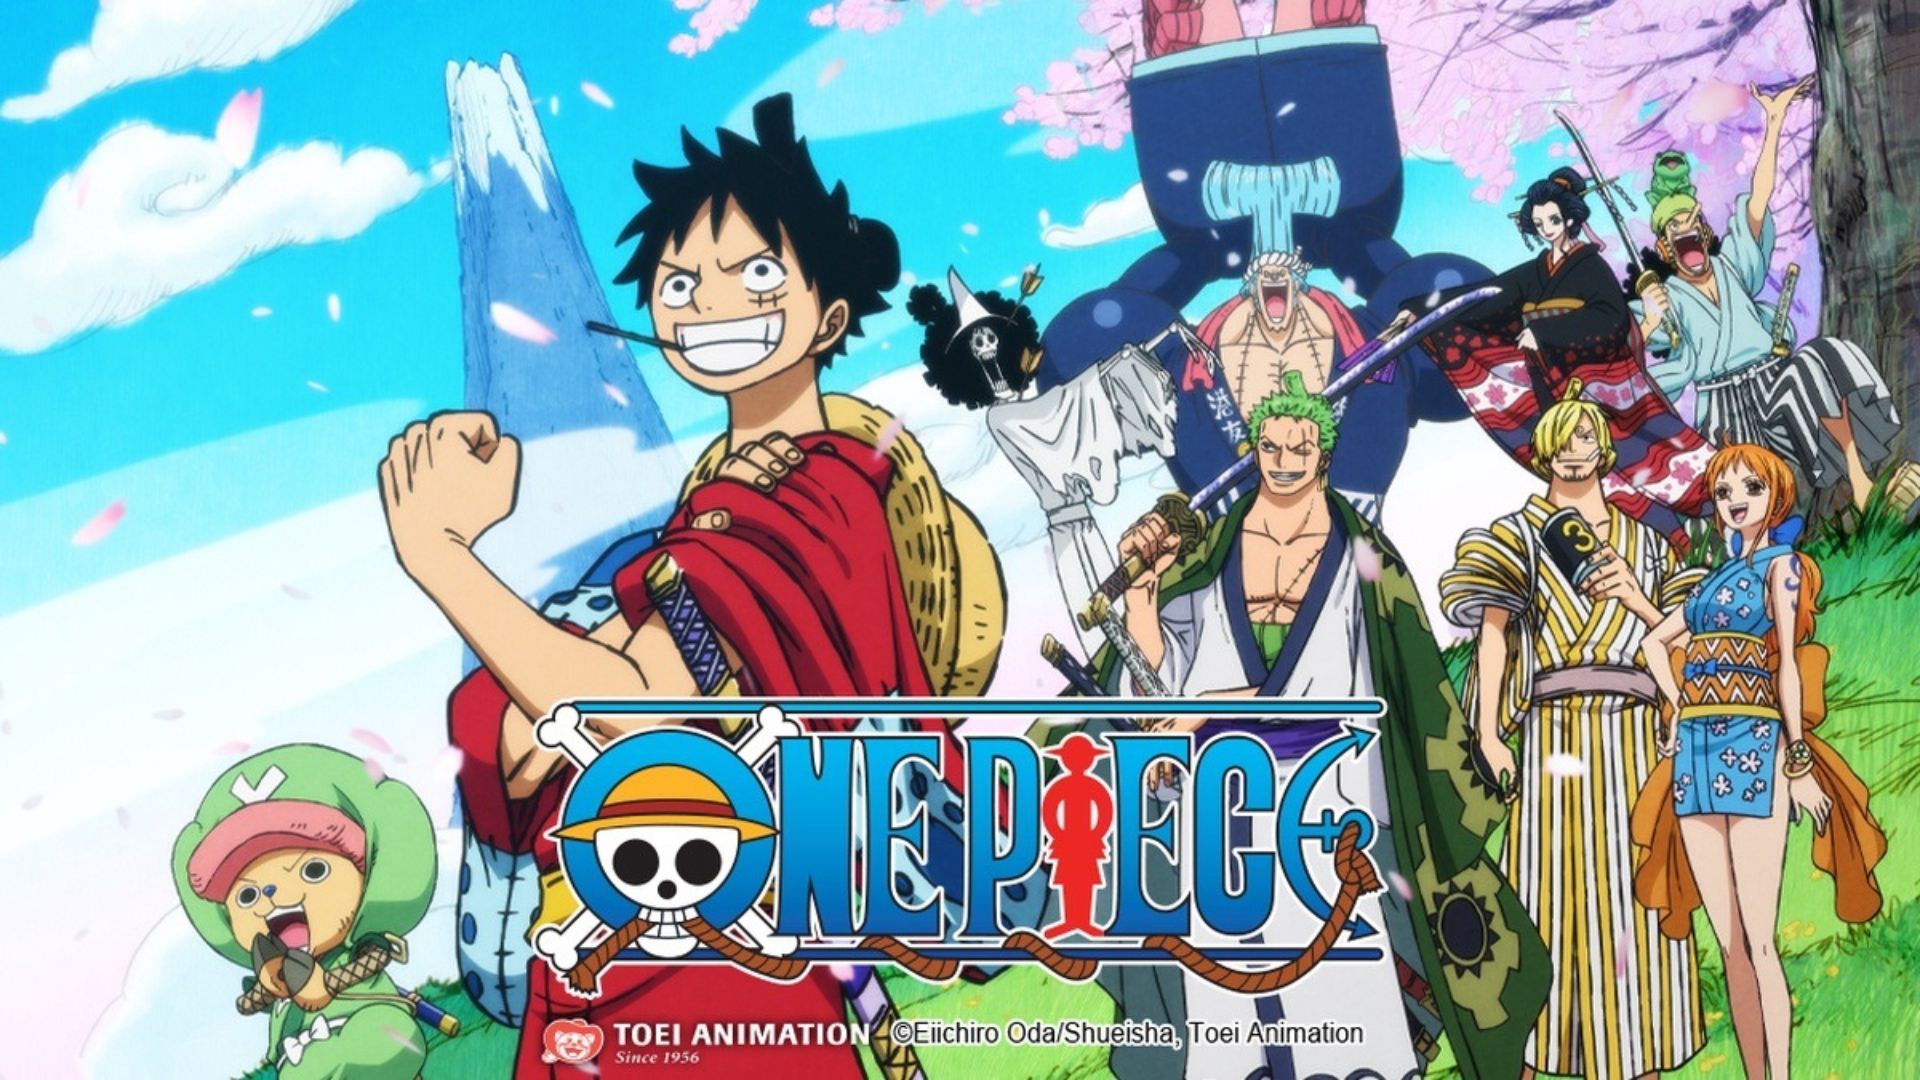 I would like Fortnite to use these details for the One Piece and